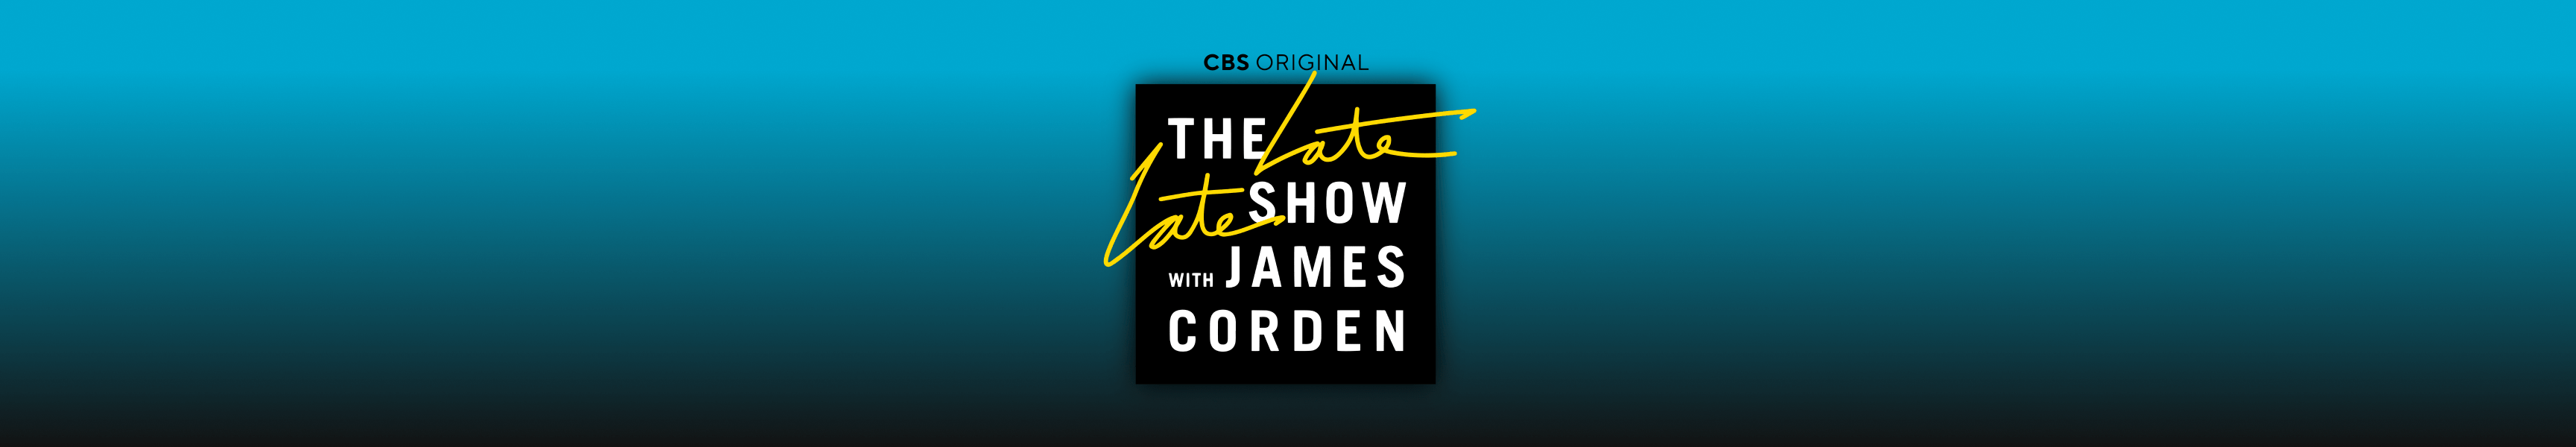 Die Late Late Show mit James Corden